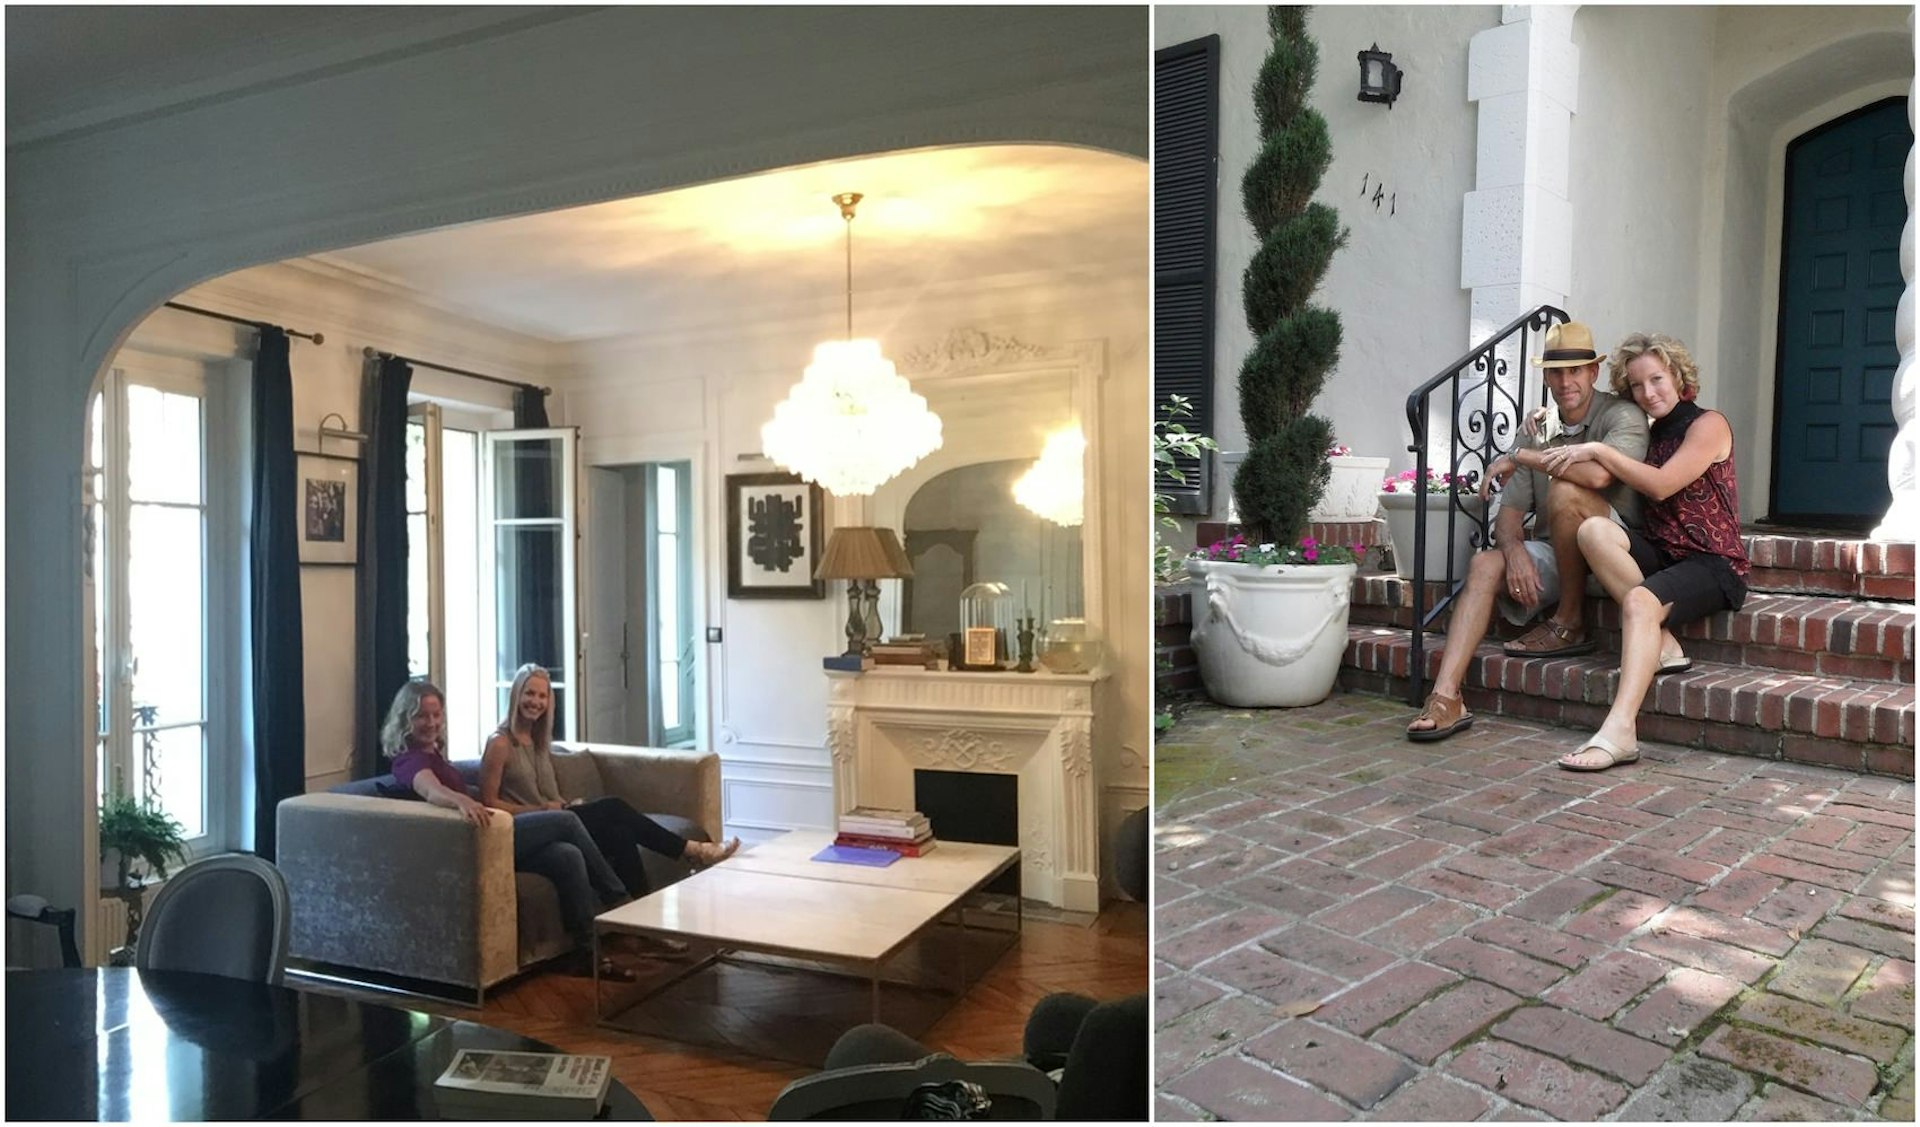 Amanda Starling has swapped her holiday home in Tennessee 20 times. With friend Candra Nebiker on a home swap in Paris (left) and husband Curt in Los Angeles (right).  